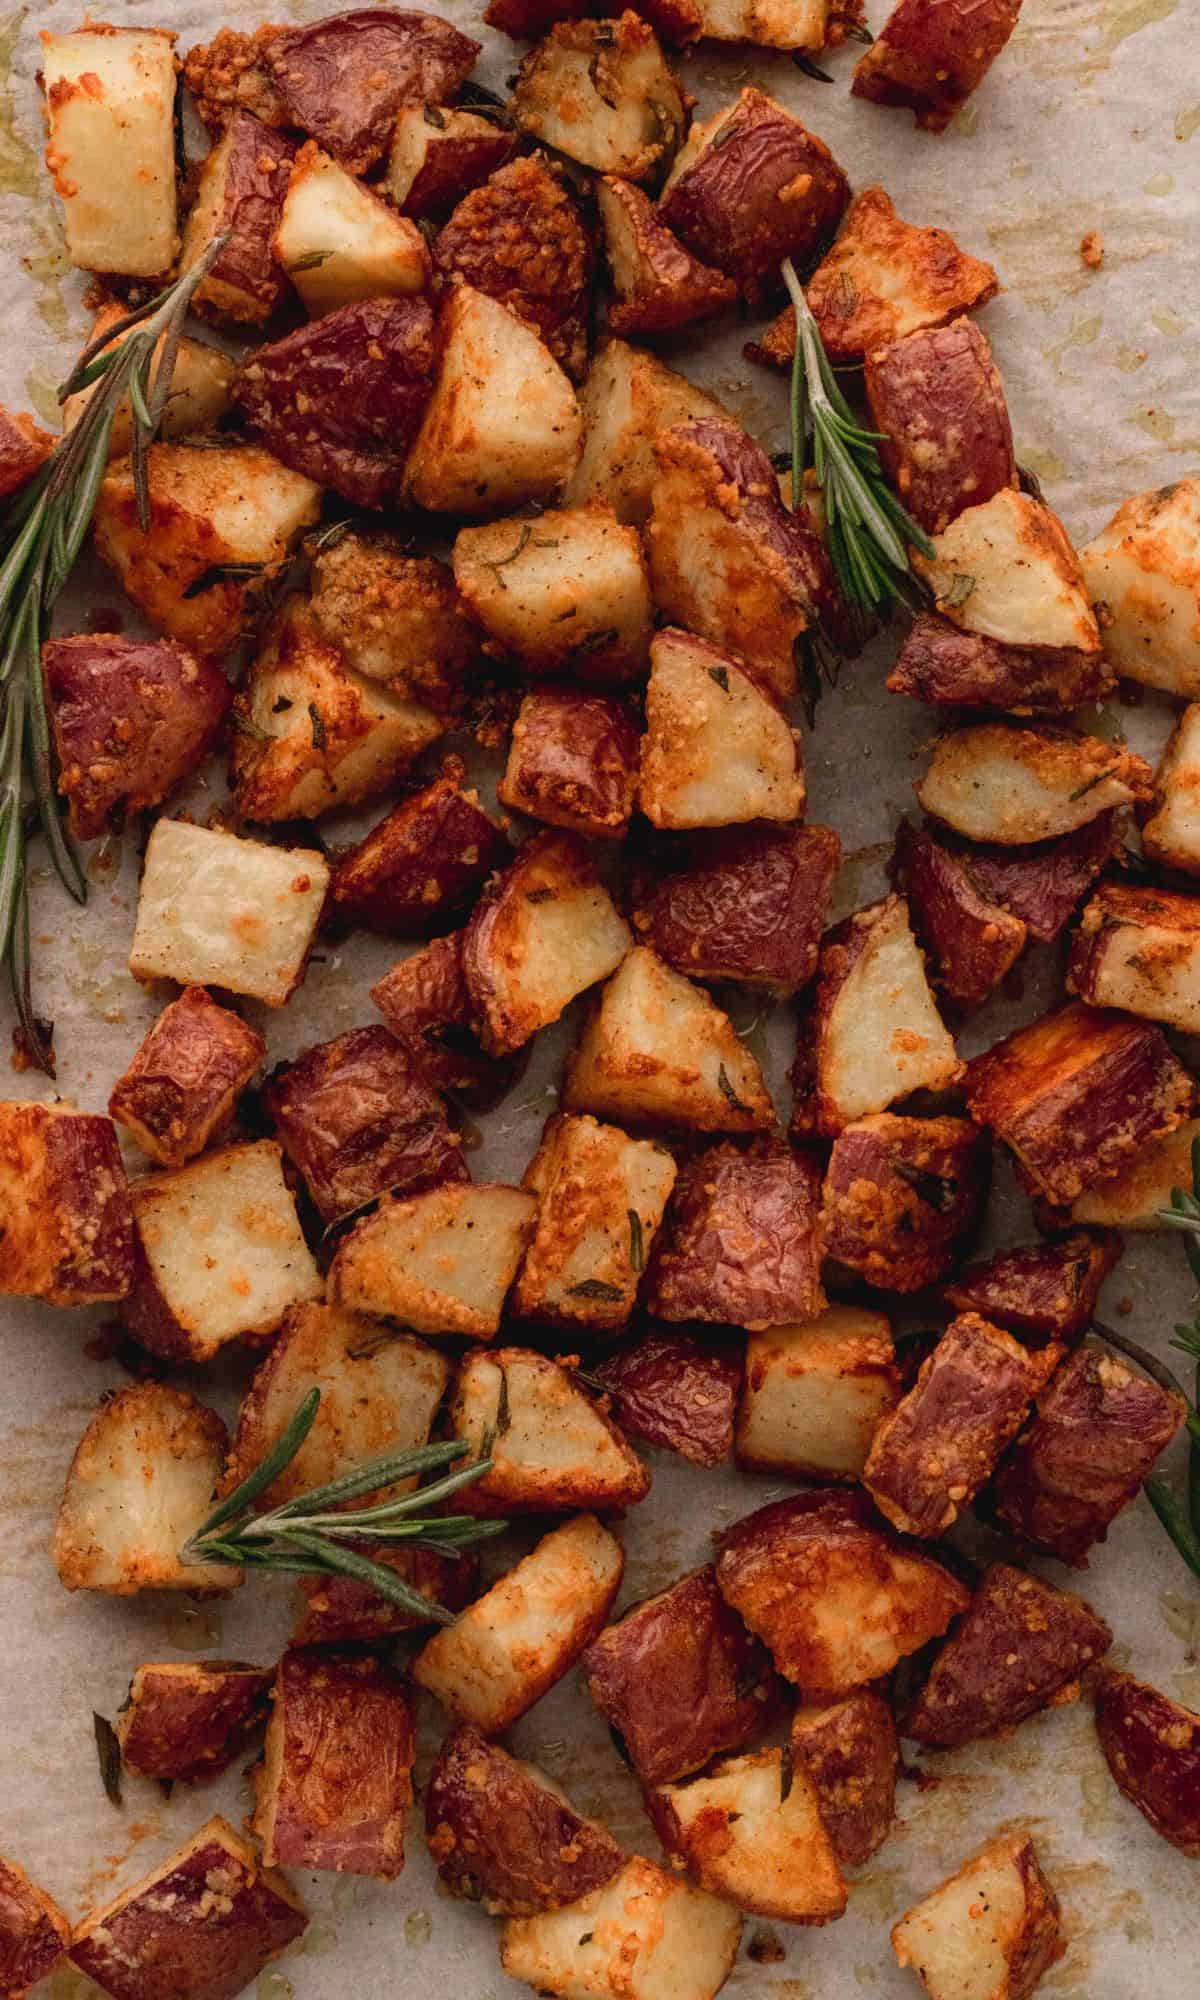 Roasted red potatoes on a baking sheet with parchment paper.